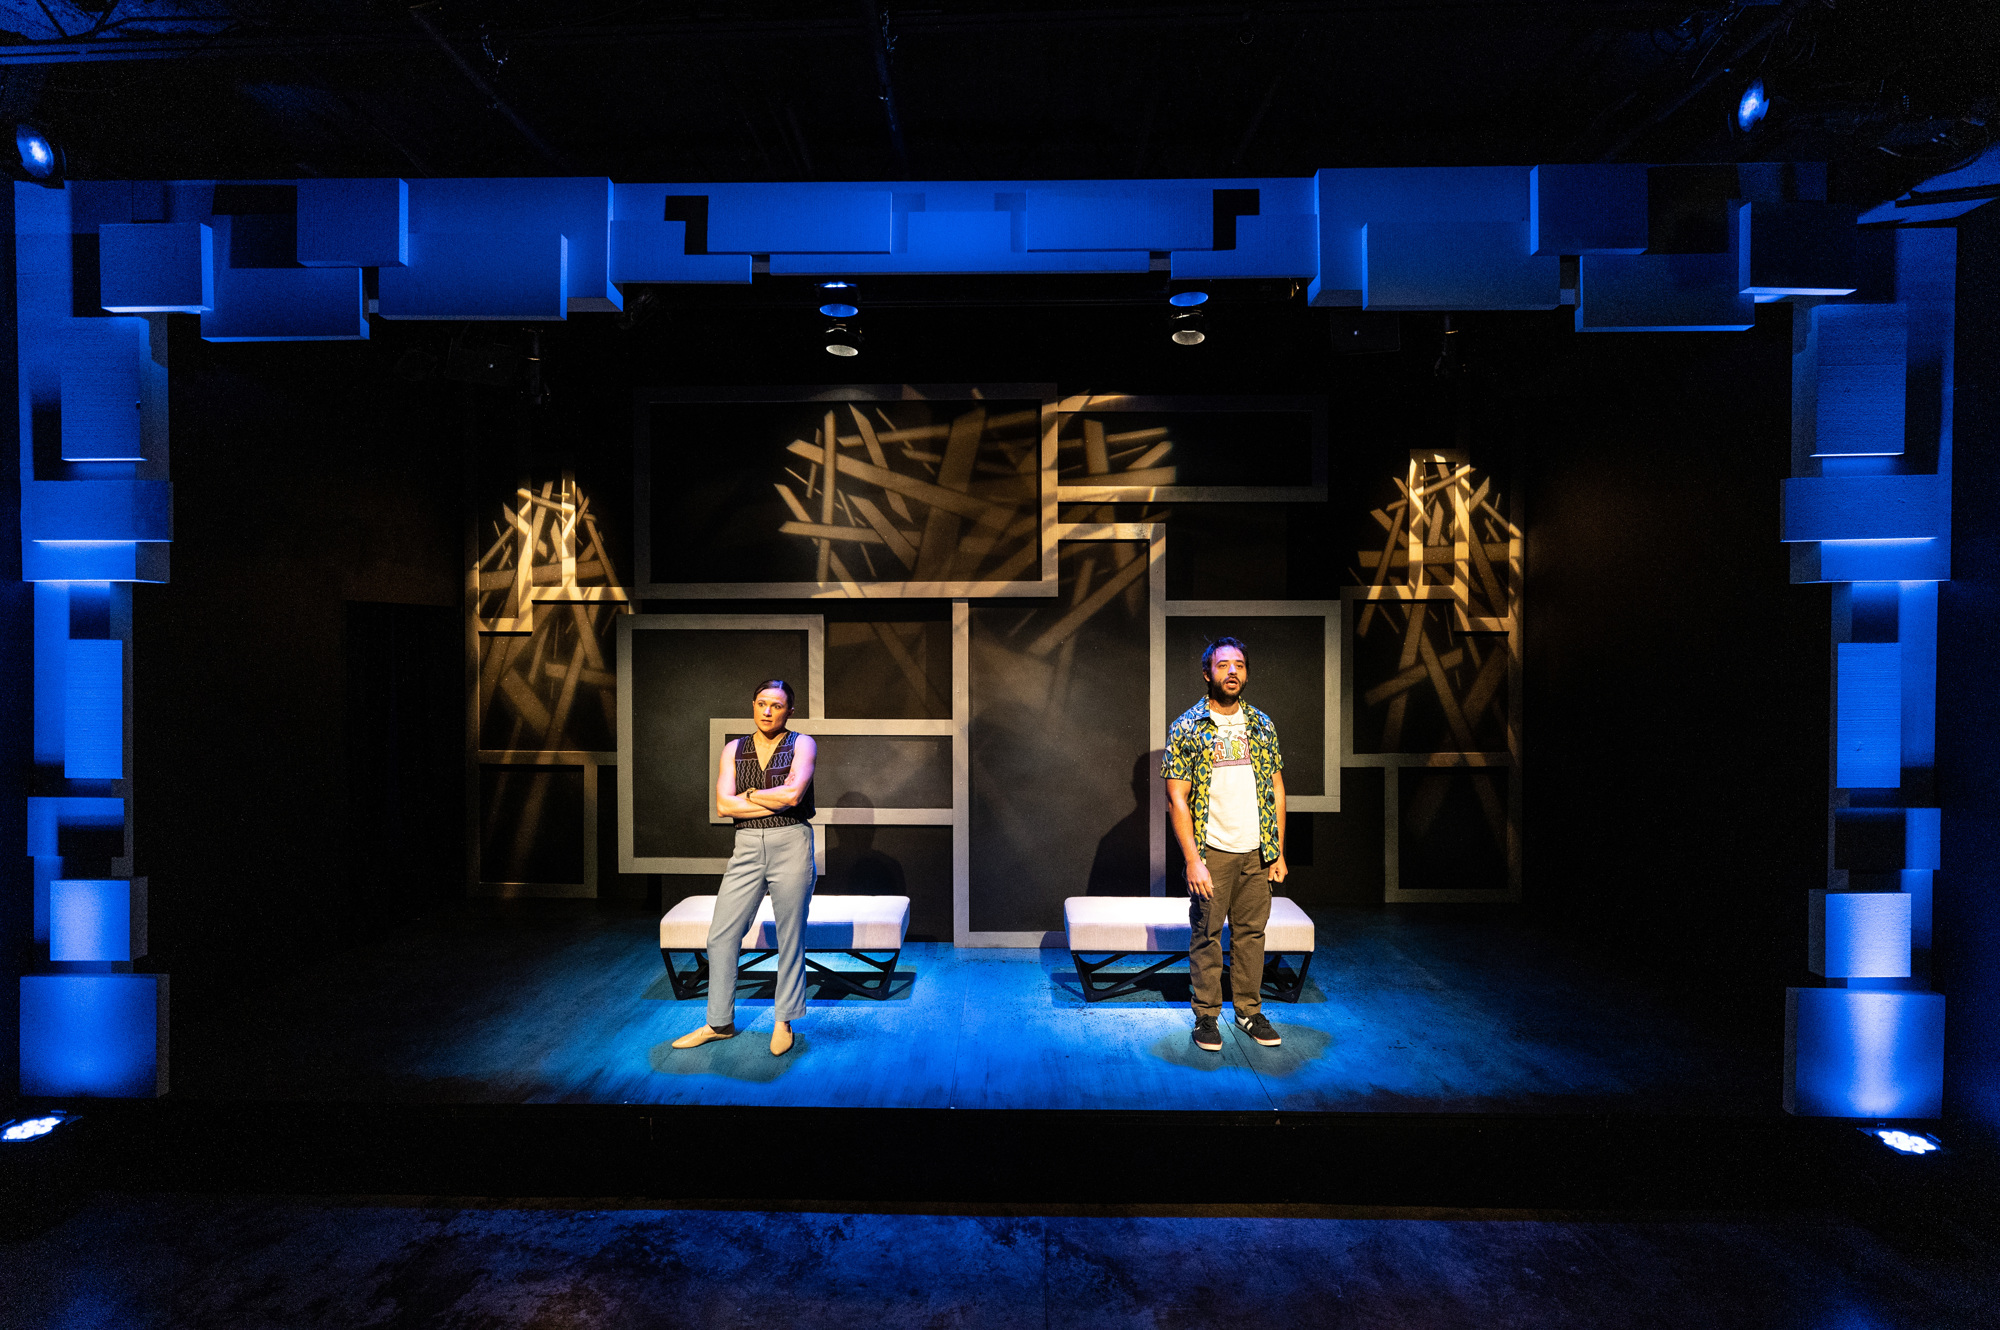 The set of The Burdens allows the two main characters to share their thoughts as relayed in text message. (Courtesy photo by Dylan Jon Wade Cox)